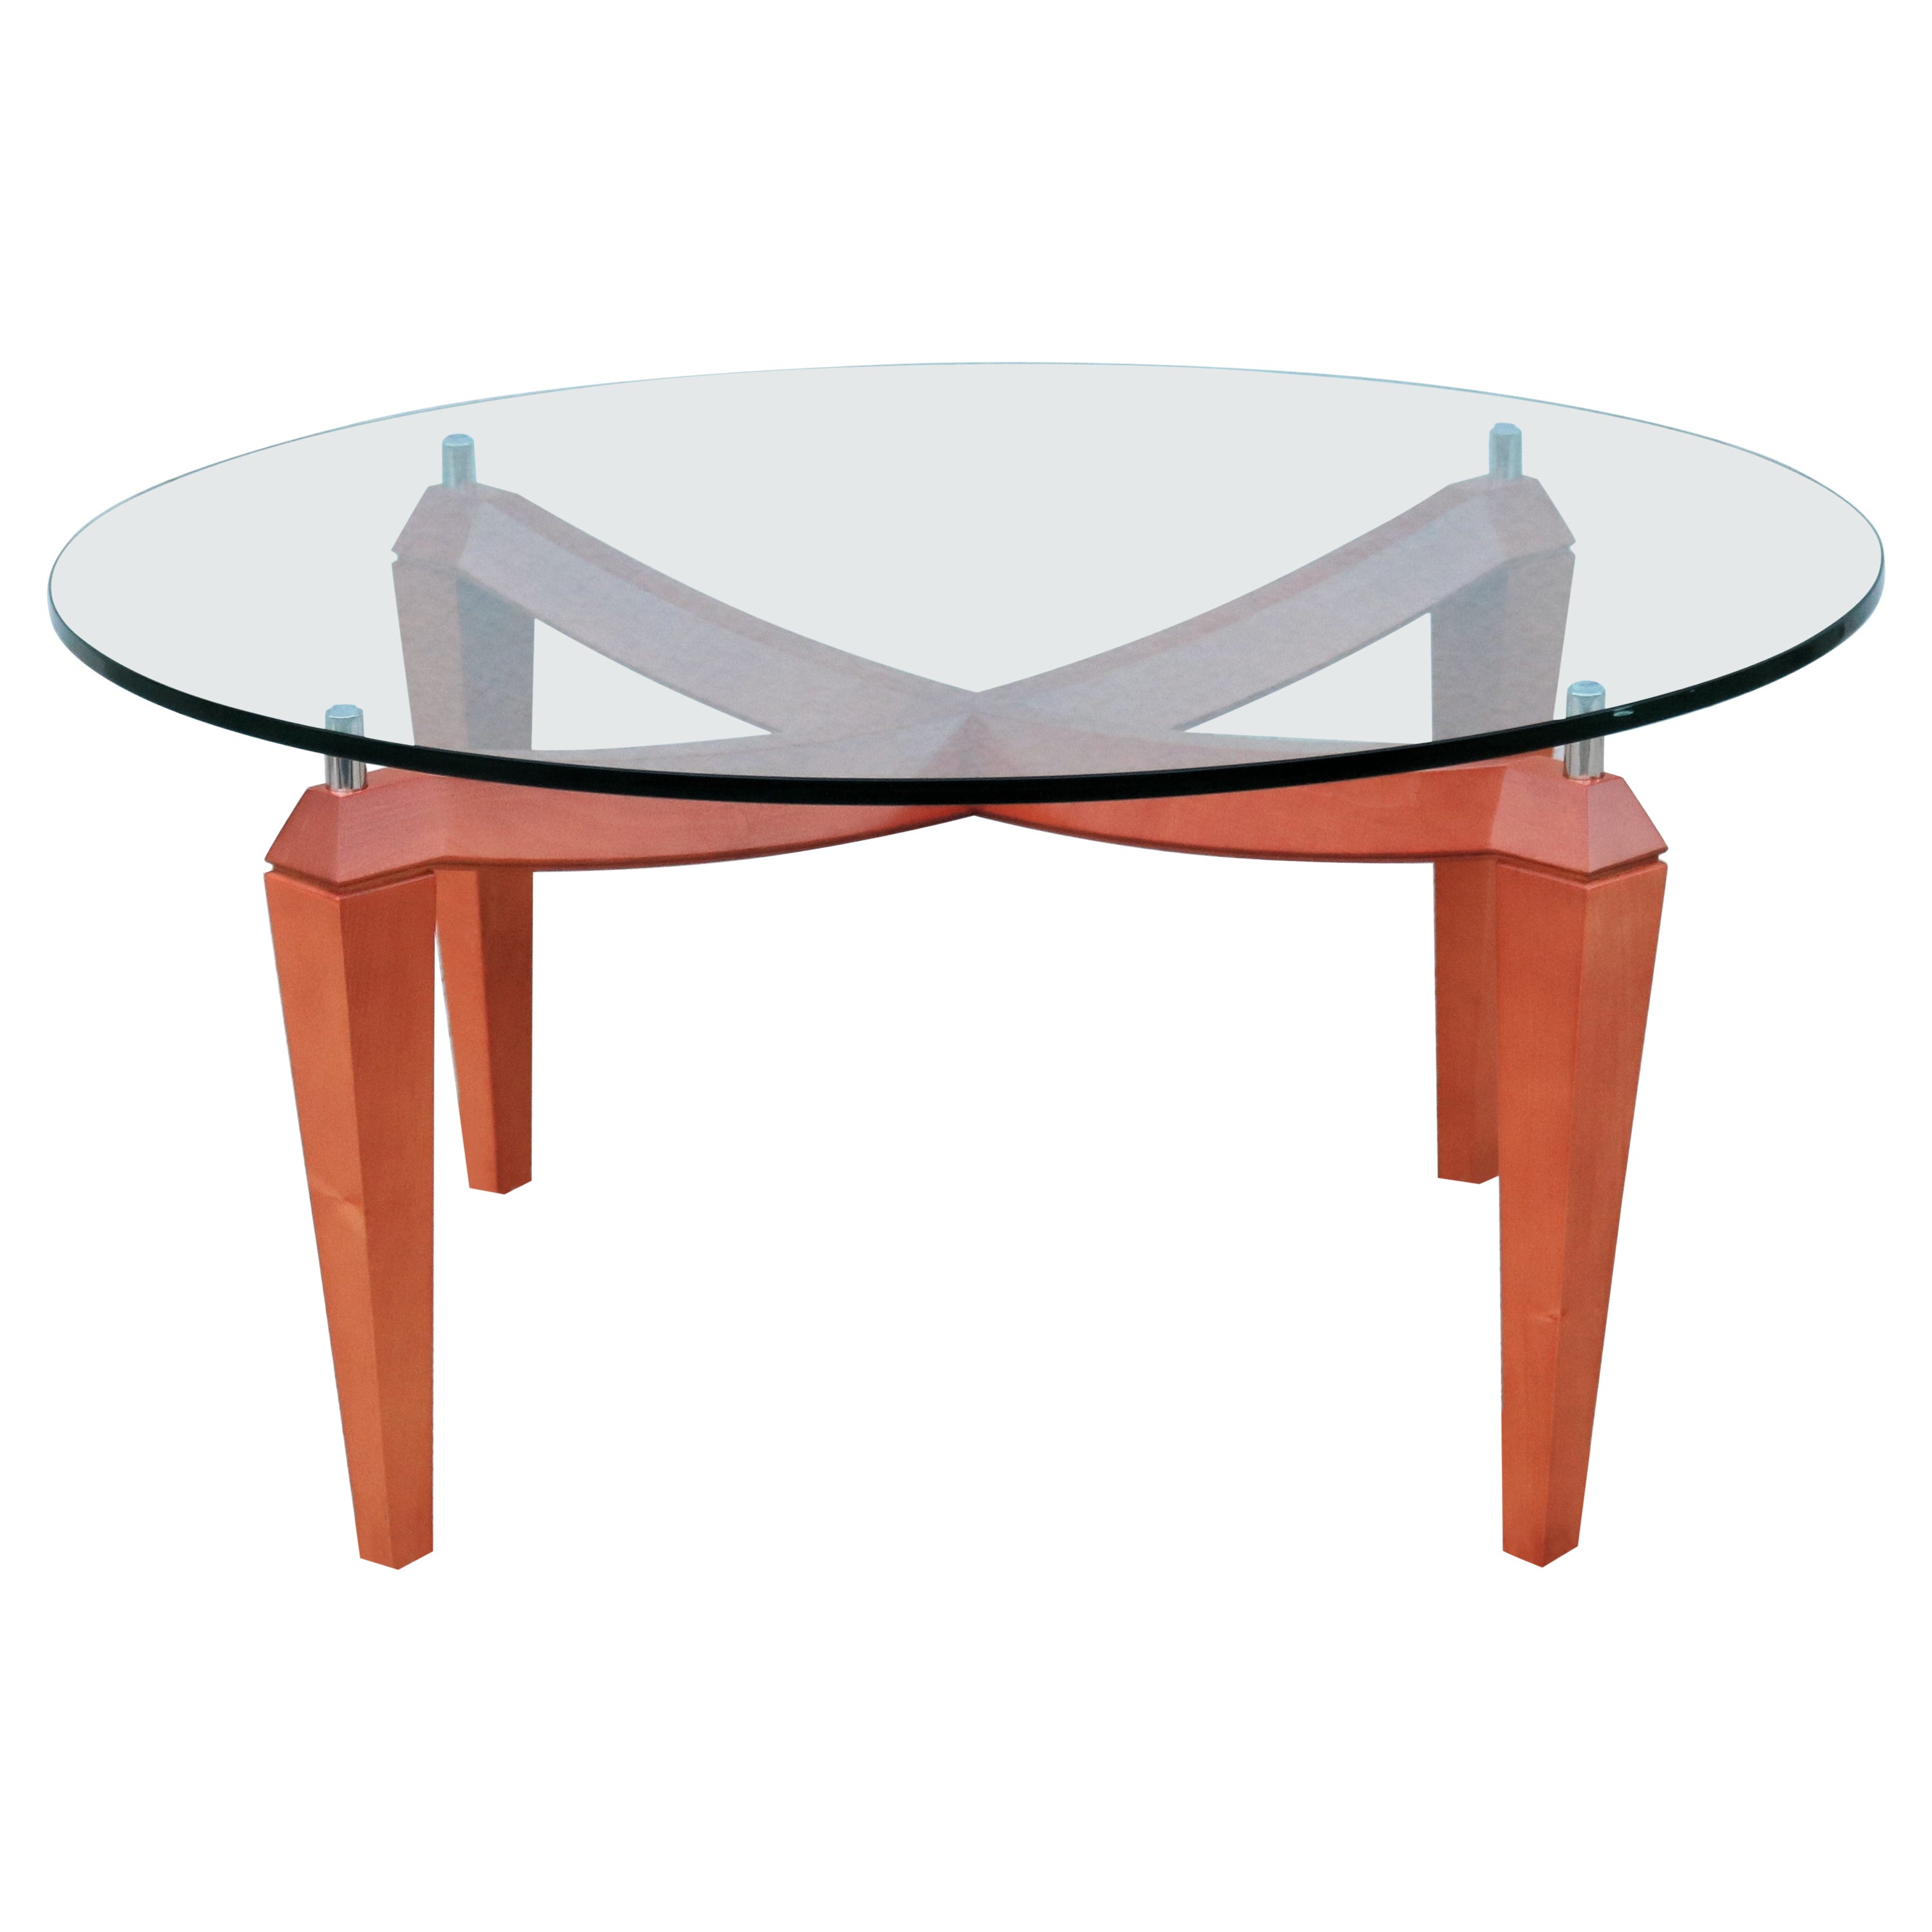 Modern Italian Cherry Wood and Transparent Glass Round Coffee Table